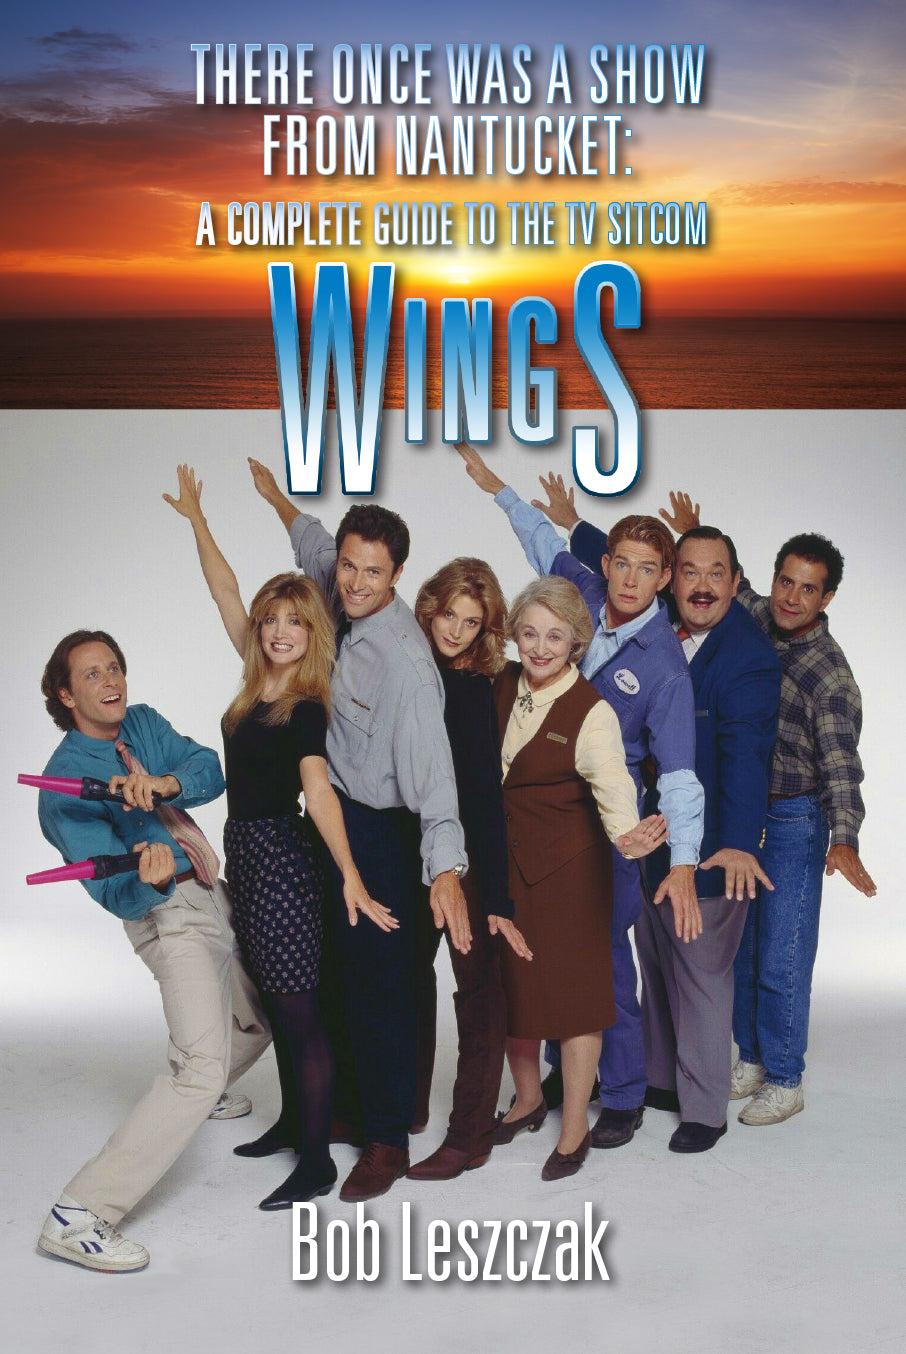 There Once Was a Show from Nantucket: A Complete Guide to the TV Sitcom Wings (hardback)